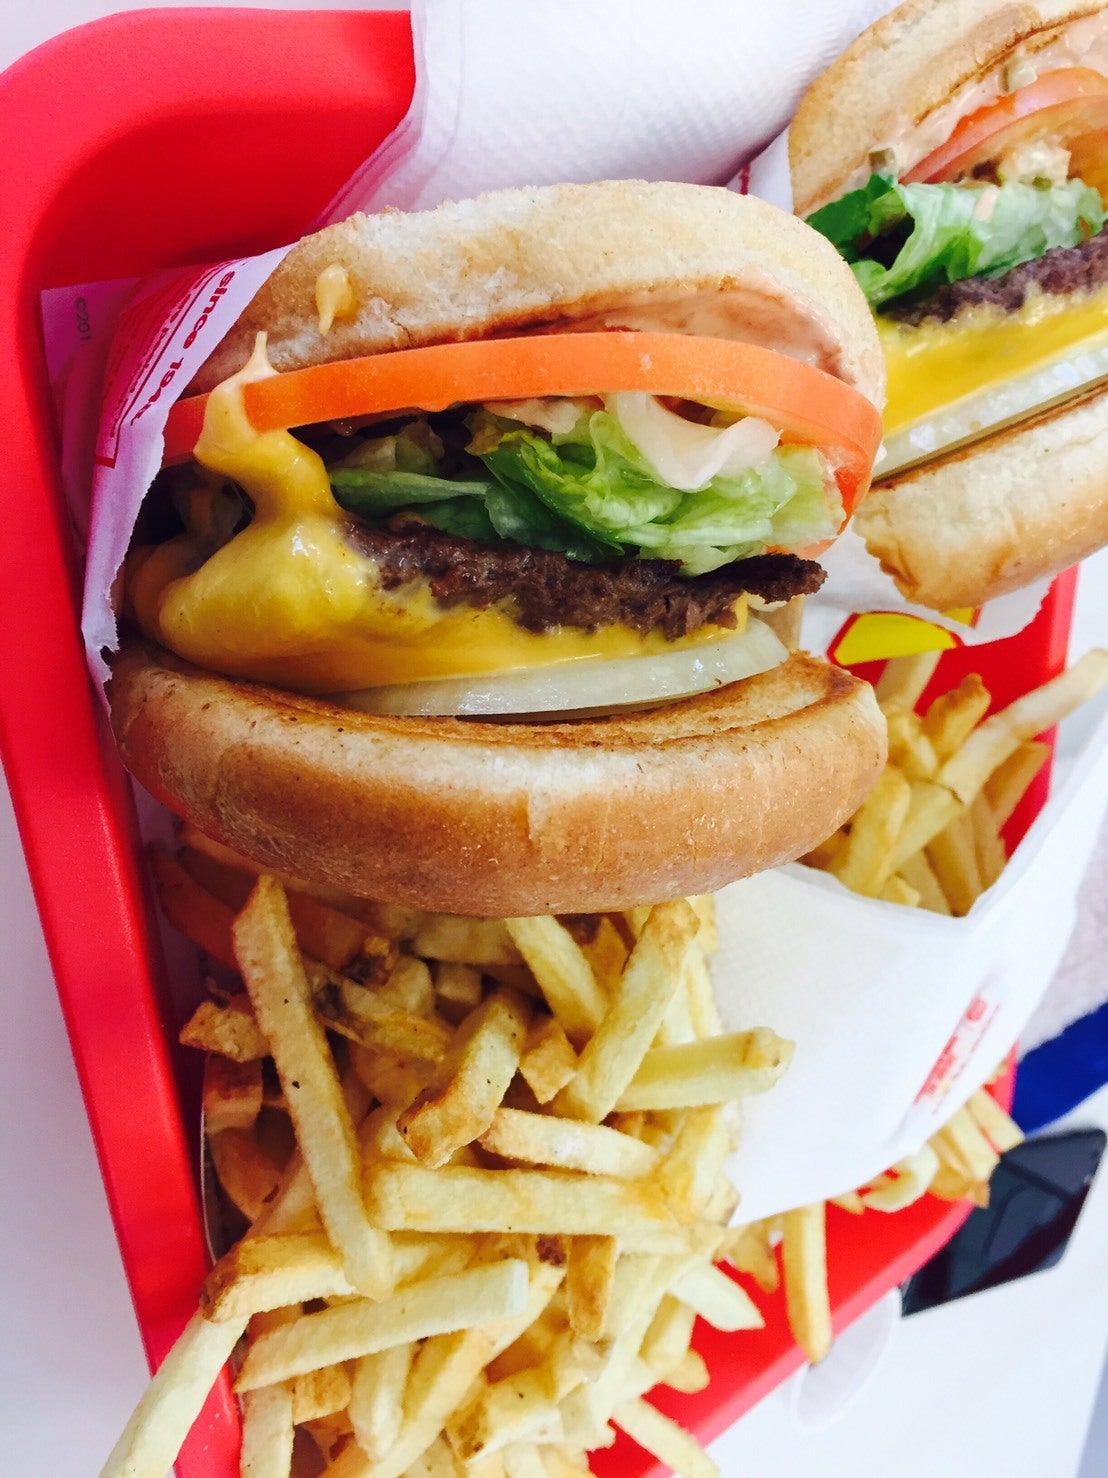 IN n out Burger & Z Cafe by South Coast Plazaの記事より